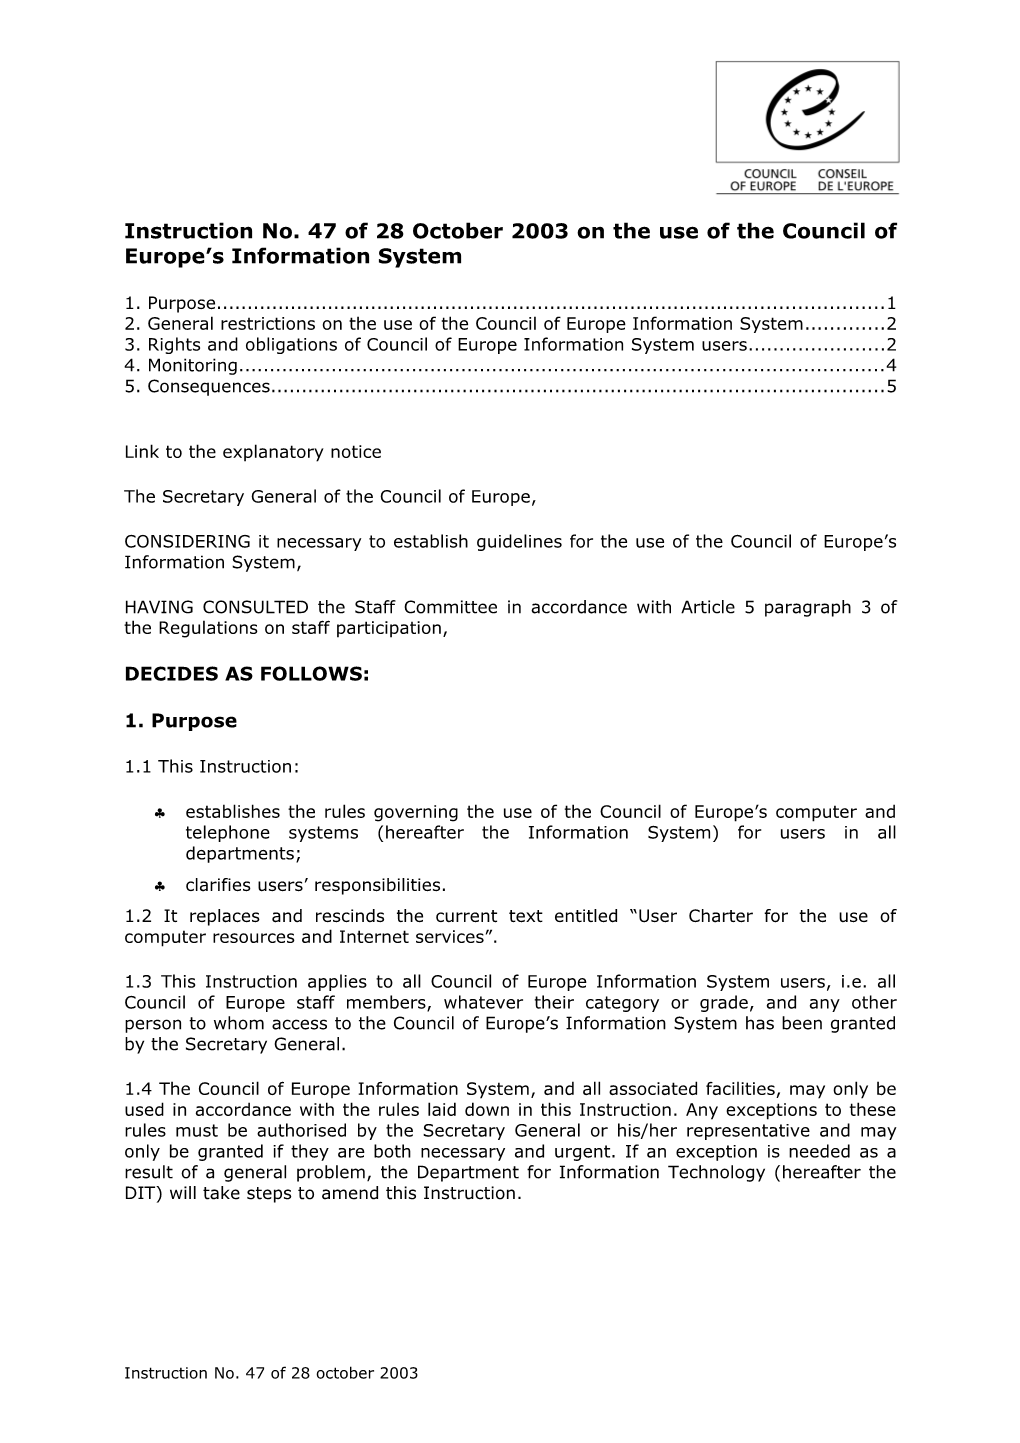 Instruction No. 47 of 28 October 2003 on the Use of the Council of Europe S Information System